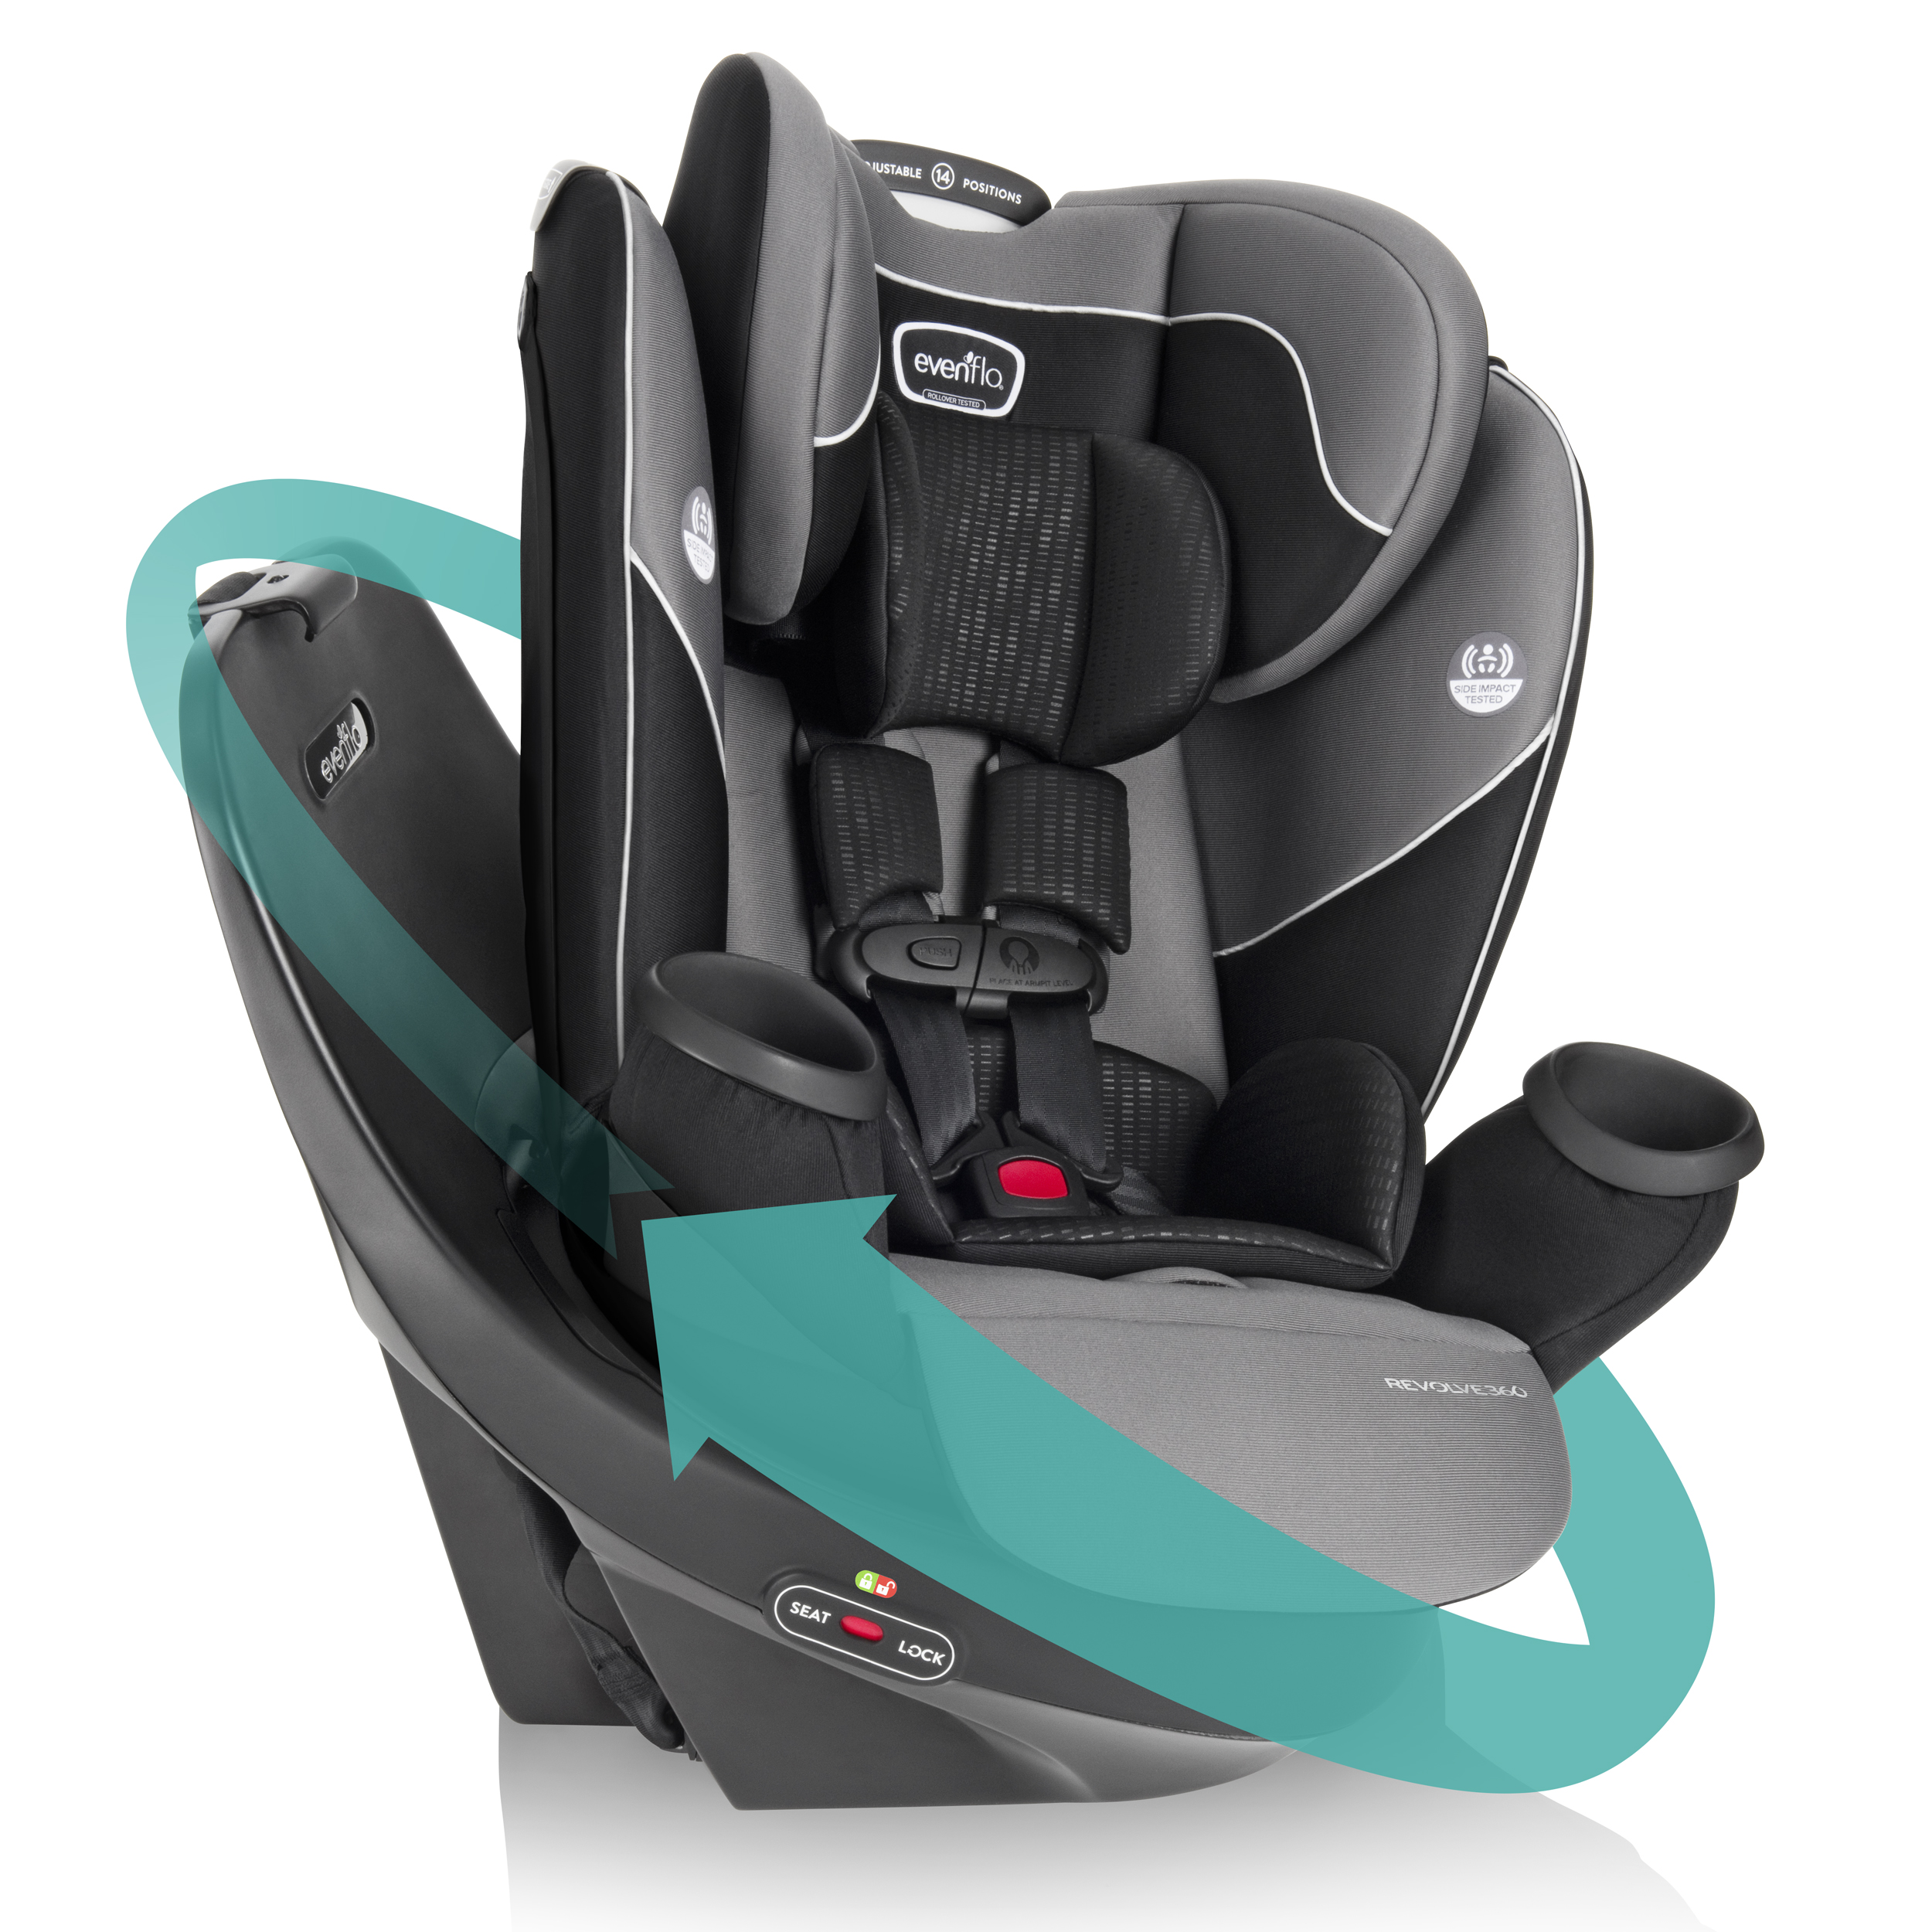 Evenflo Revolve360 Rotational All-In-One Convertible Car Seat (Amherst Gray) - image 1 of 25